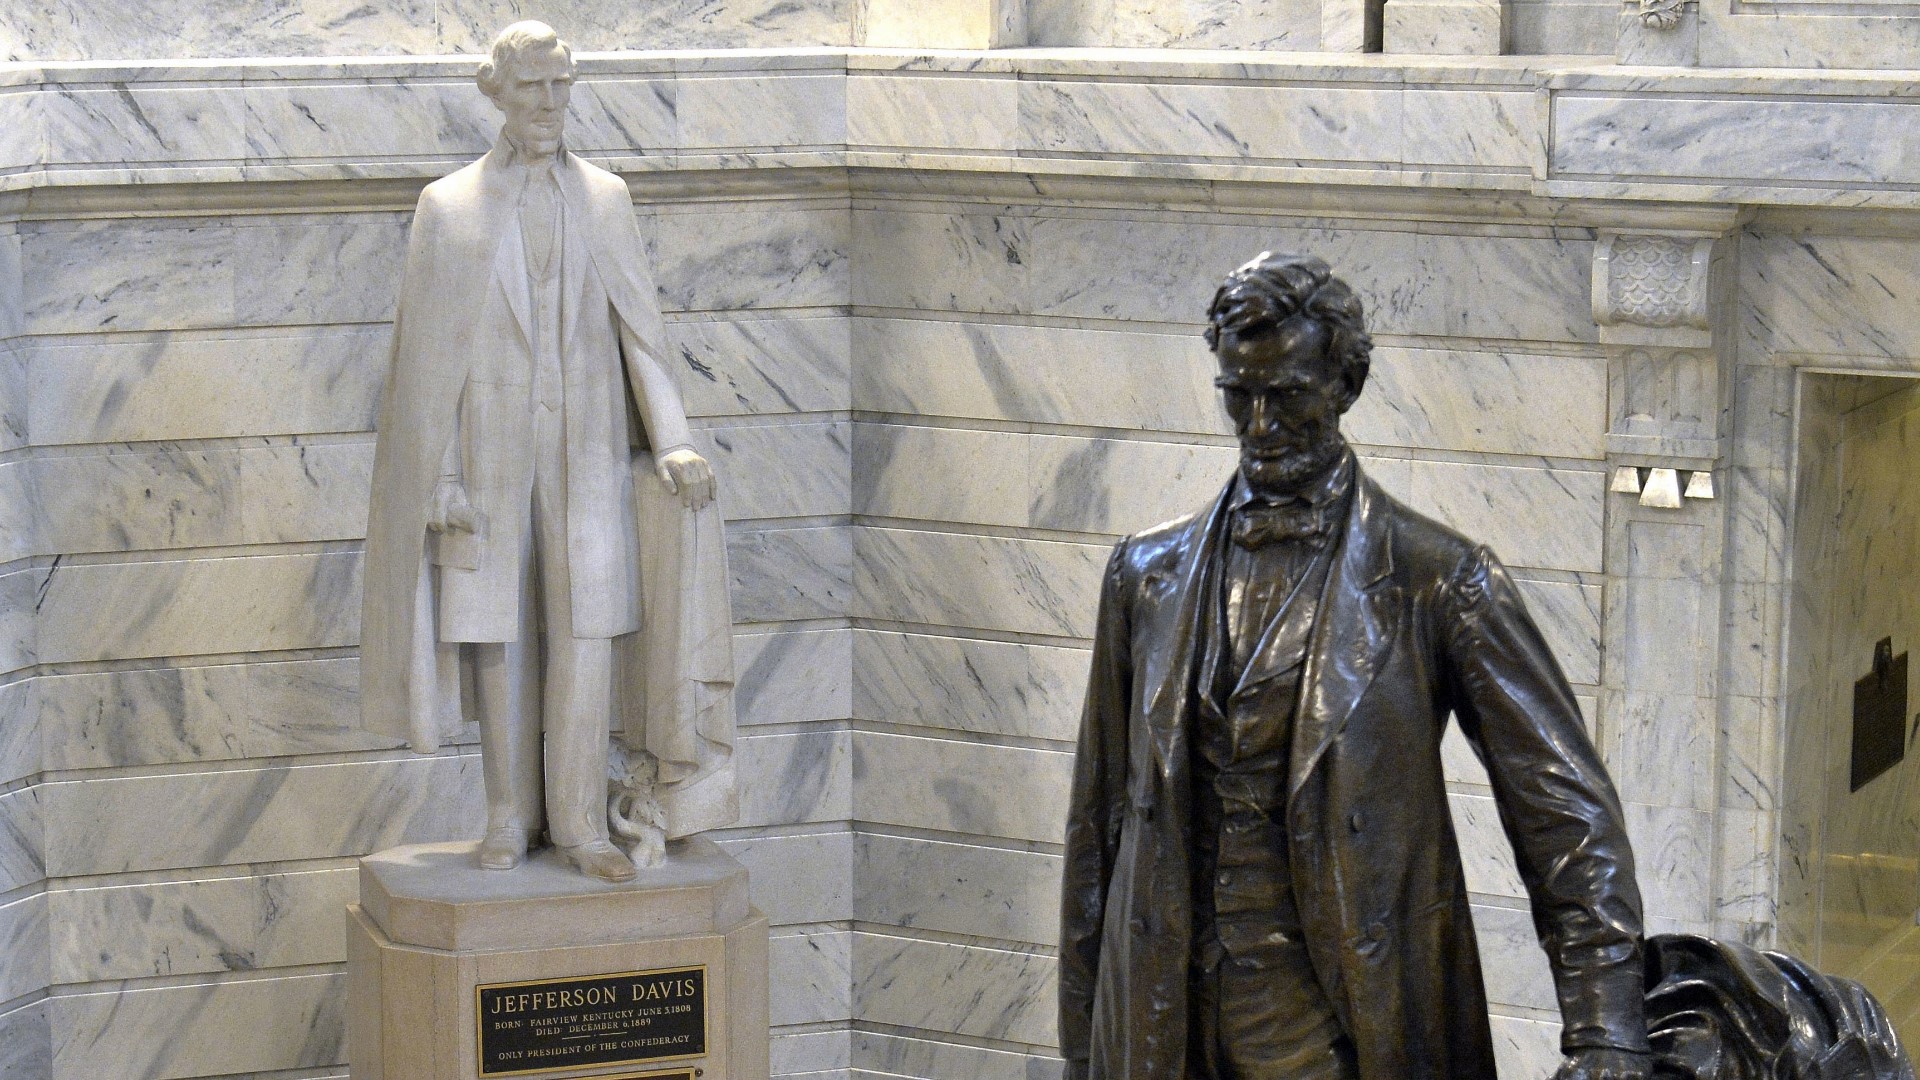 Kentucky Gov. Andy Beshear said the statue of Jefferson Davis that currently sits in the Capitol rotunda should be taken down.